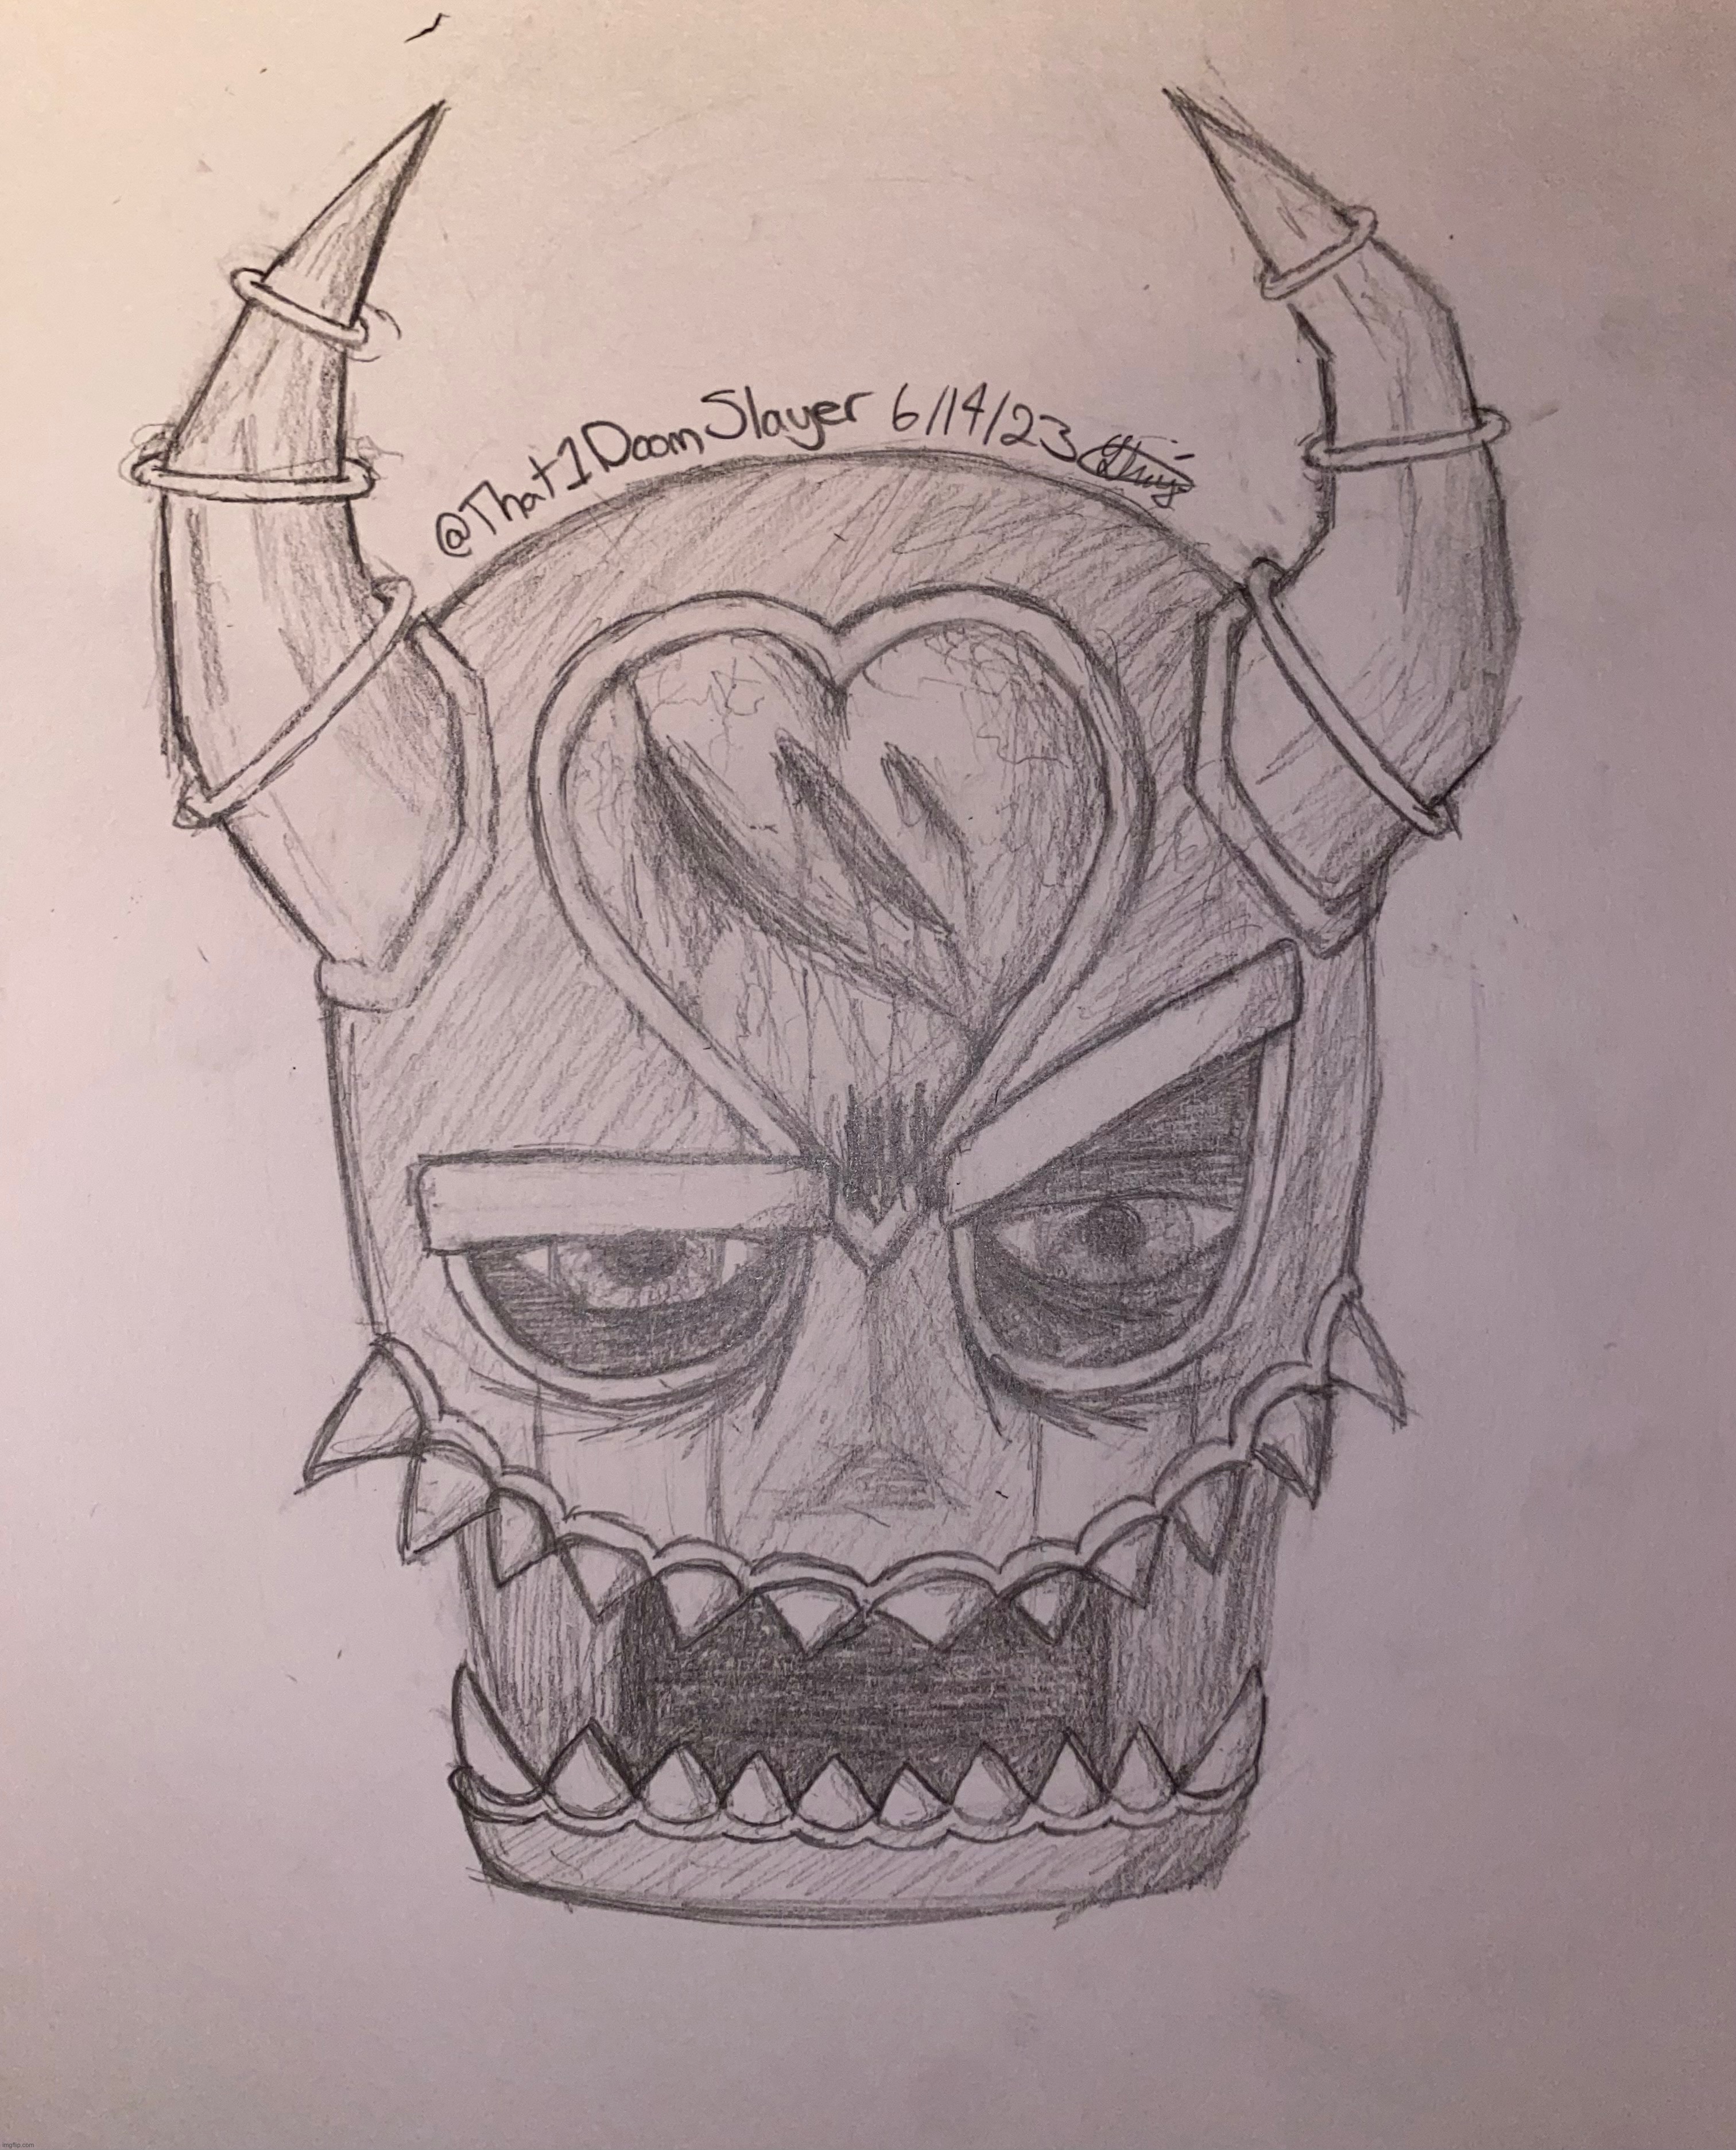 I made a mask that i would wear if i was in slipknot :) | image tagged in drawing,slipknot,we love slipknot,rehehehehehe,i feel a tad silly right now,maybe even a bit goofy | made w/ Imgflip meme maker